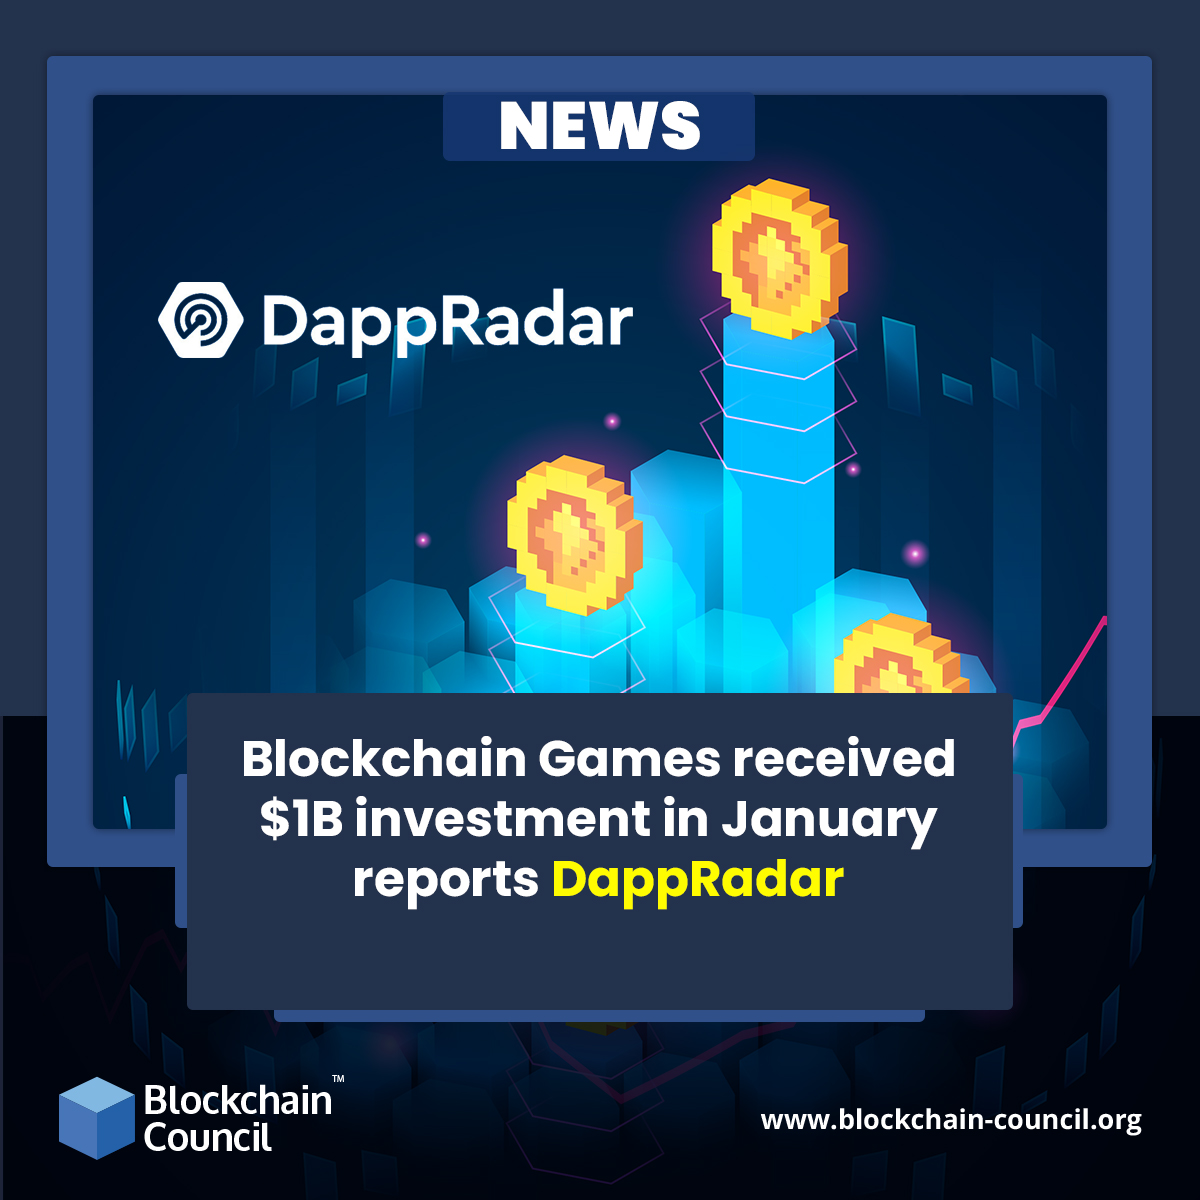 Blockchain Games received $1B investment in January reports DappRadar